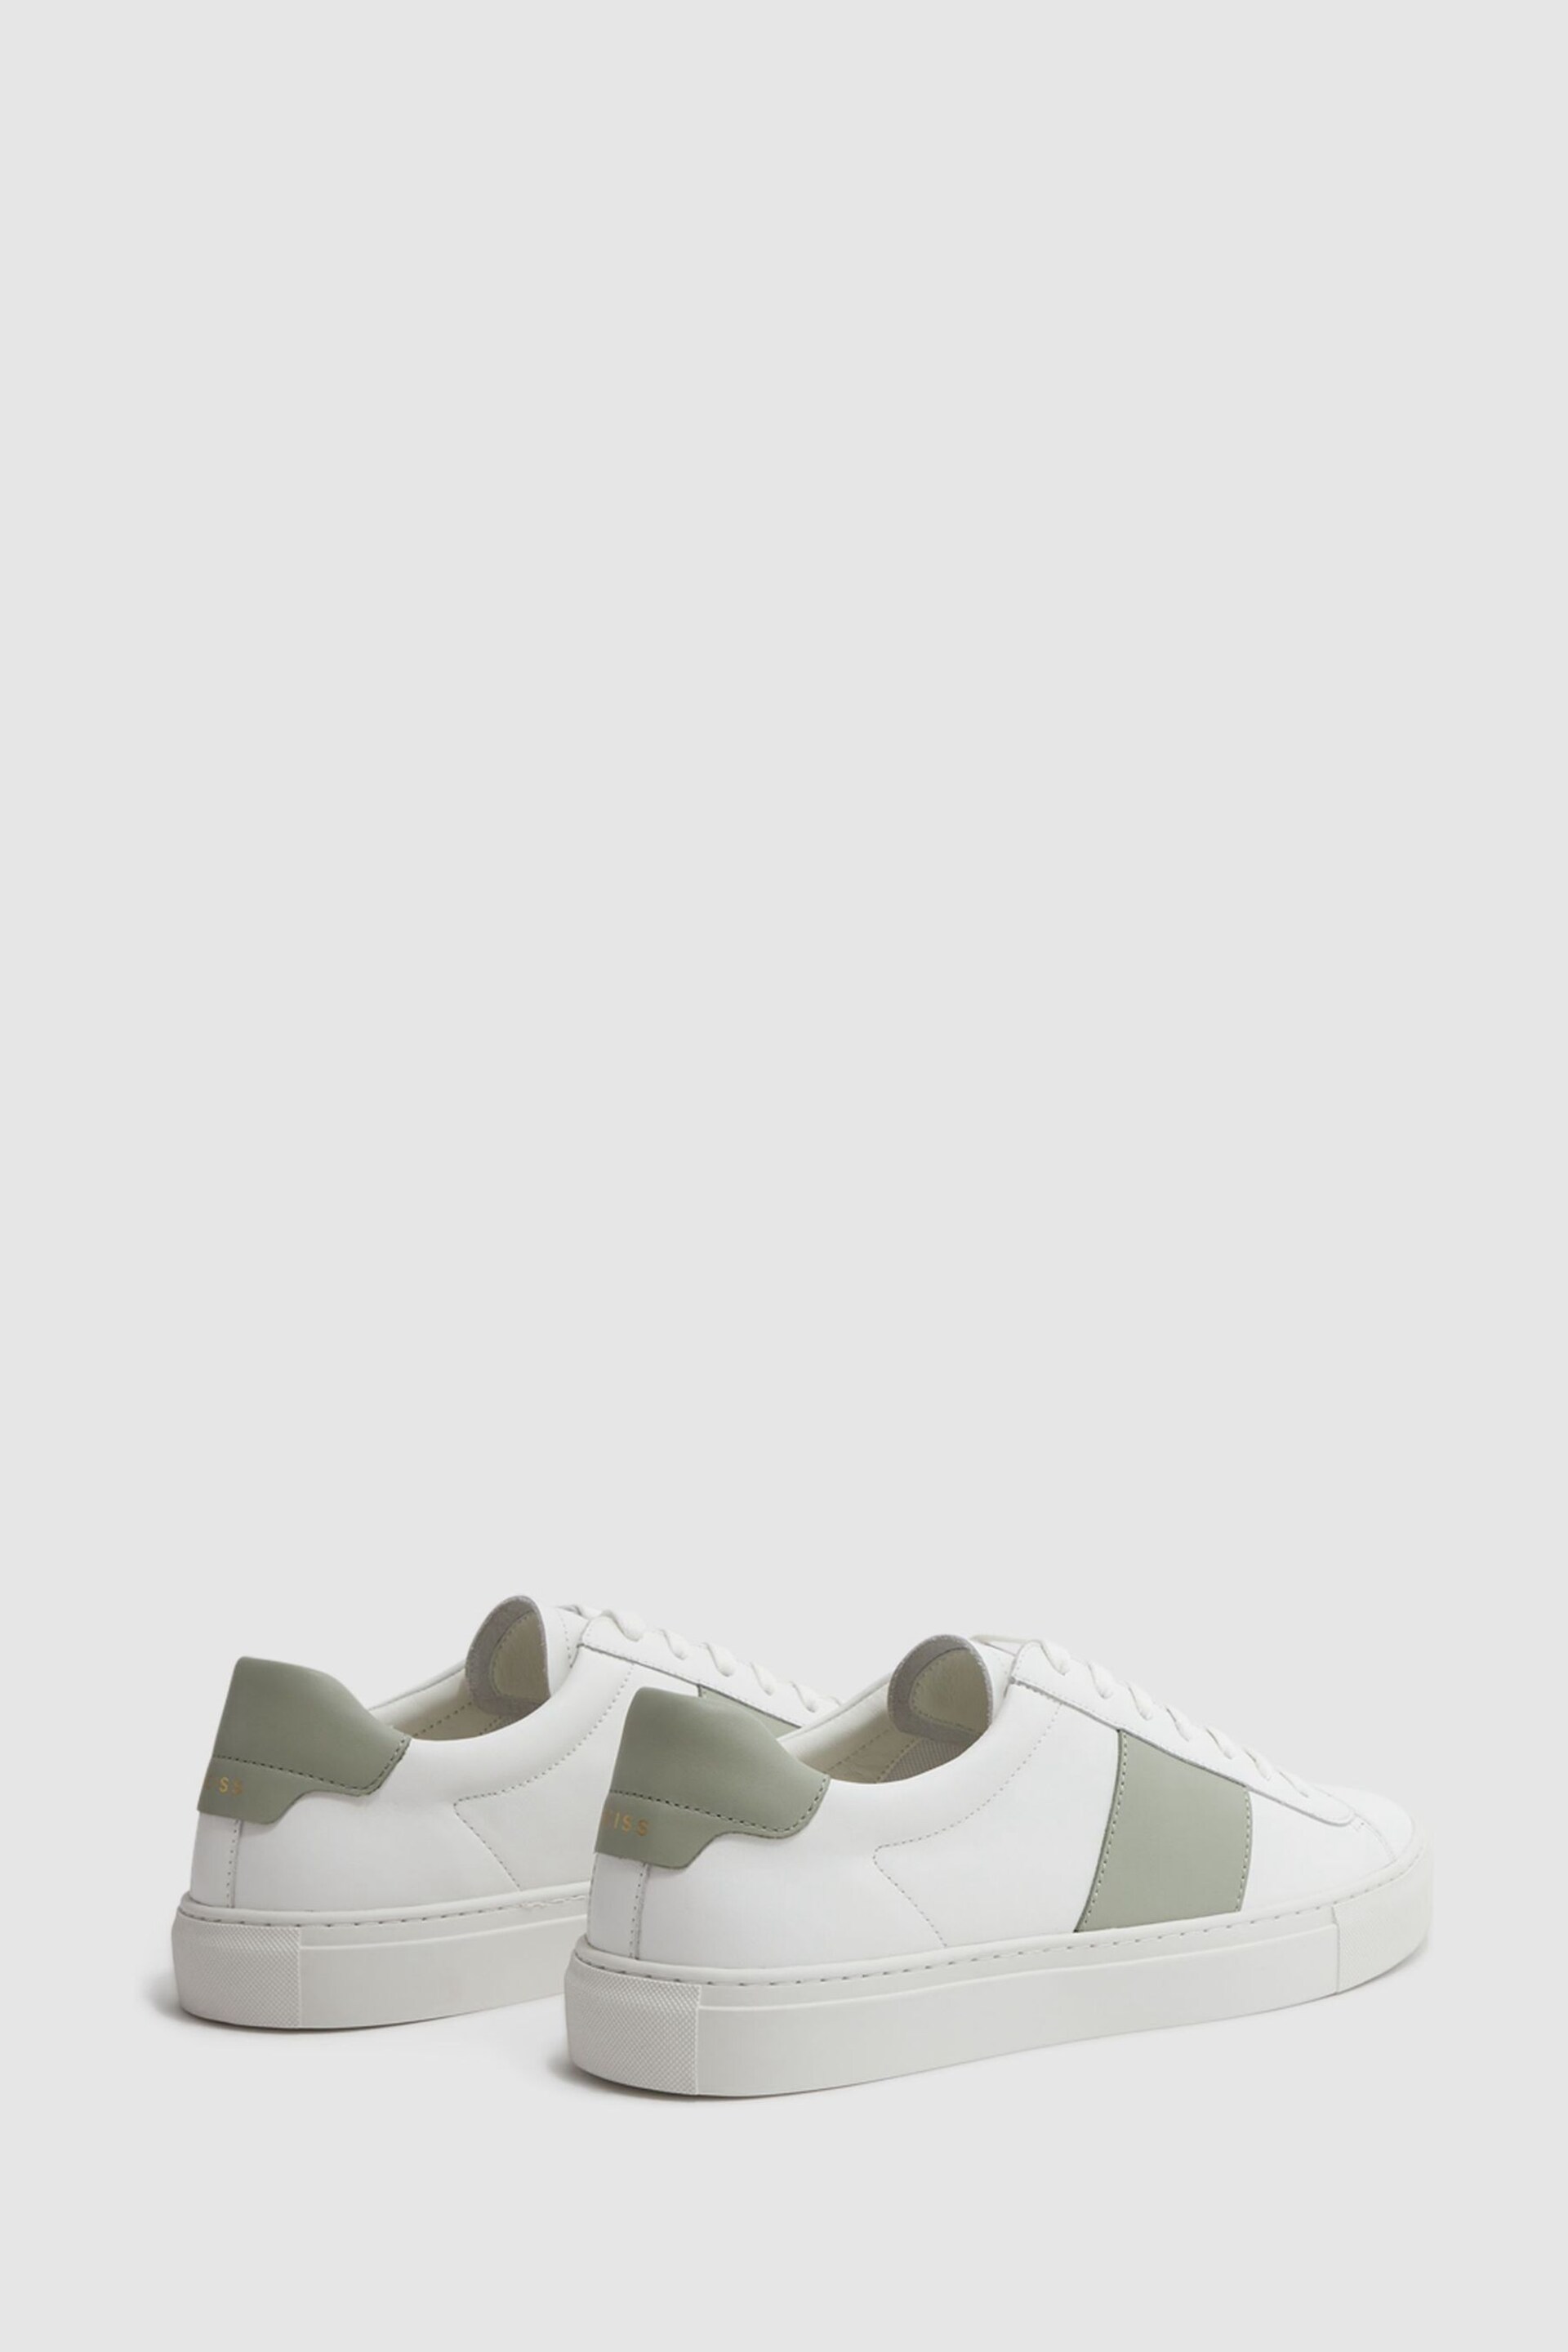 Reiss White/Sage Finley Stripe Leather Trainers - Image 4 of 4